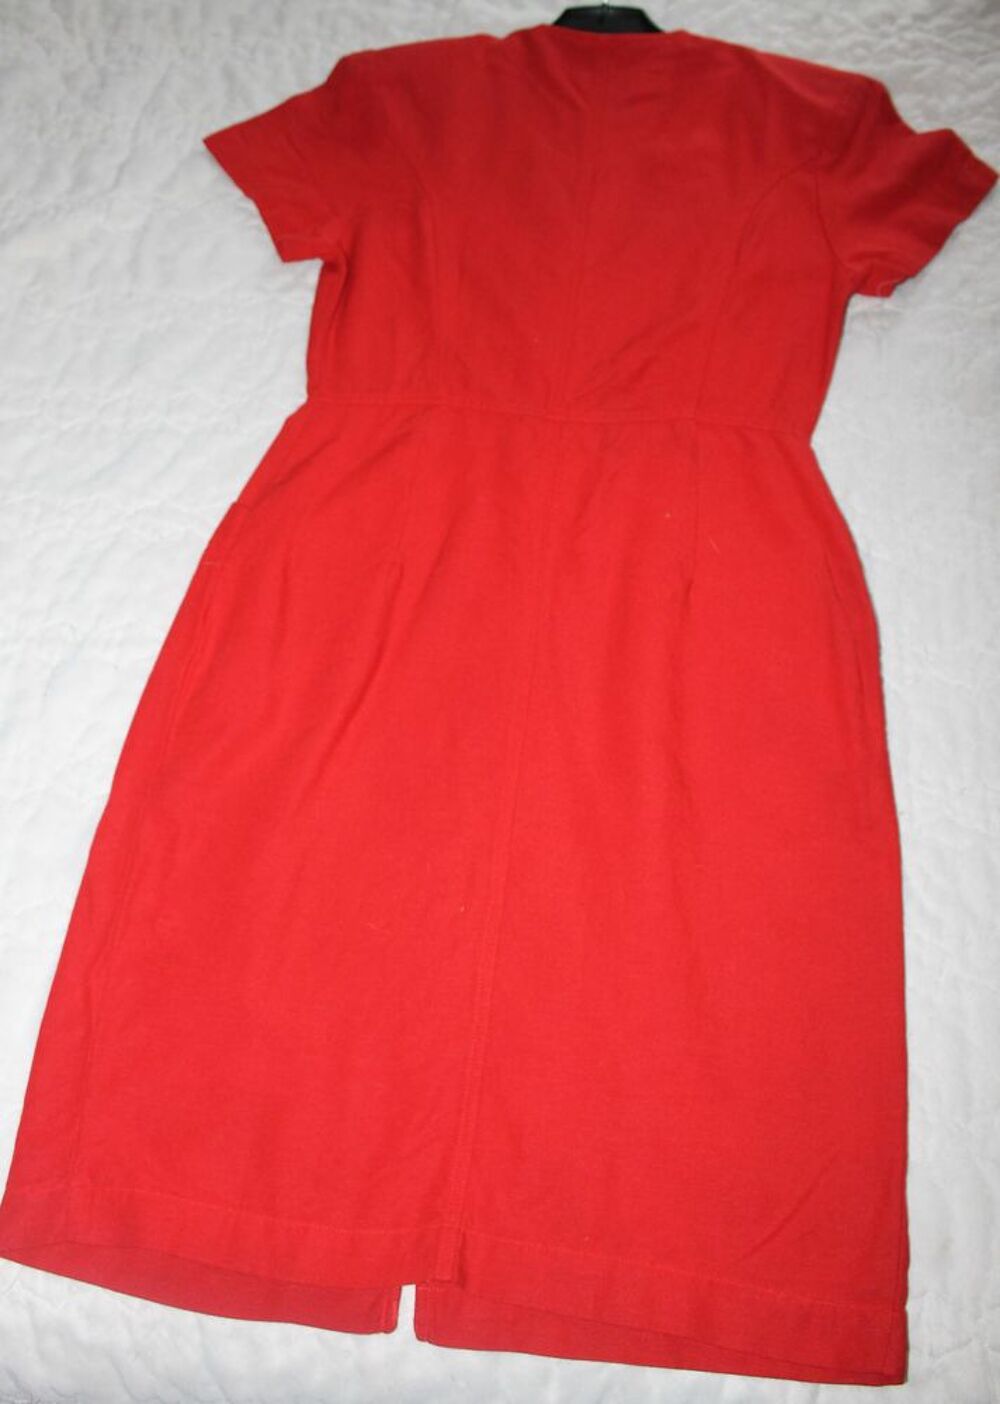 Robe vintage rouge ? Taille 38 /40 Vtements